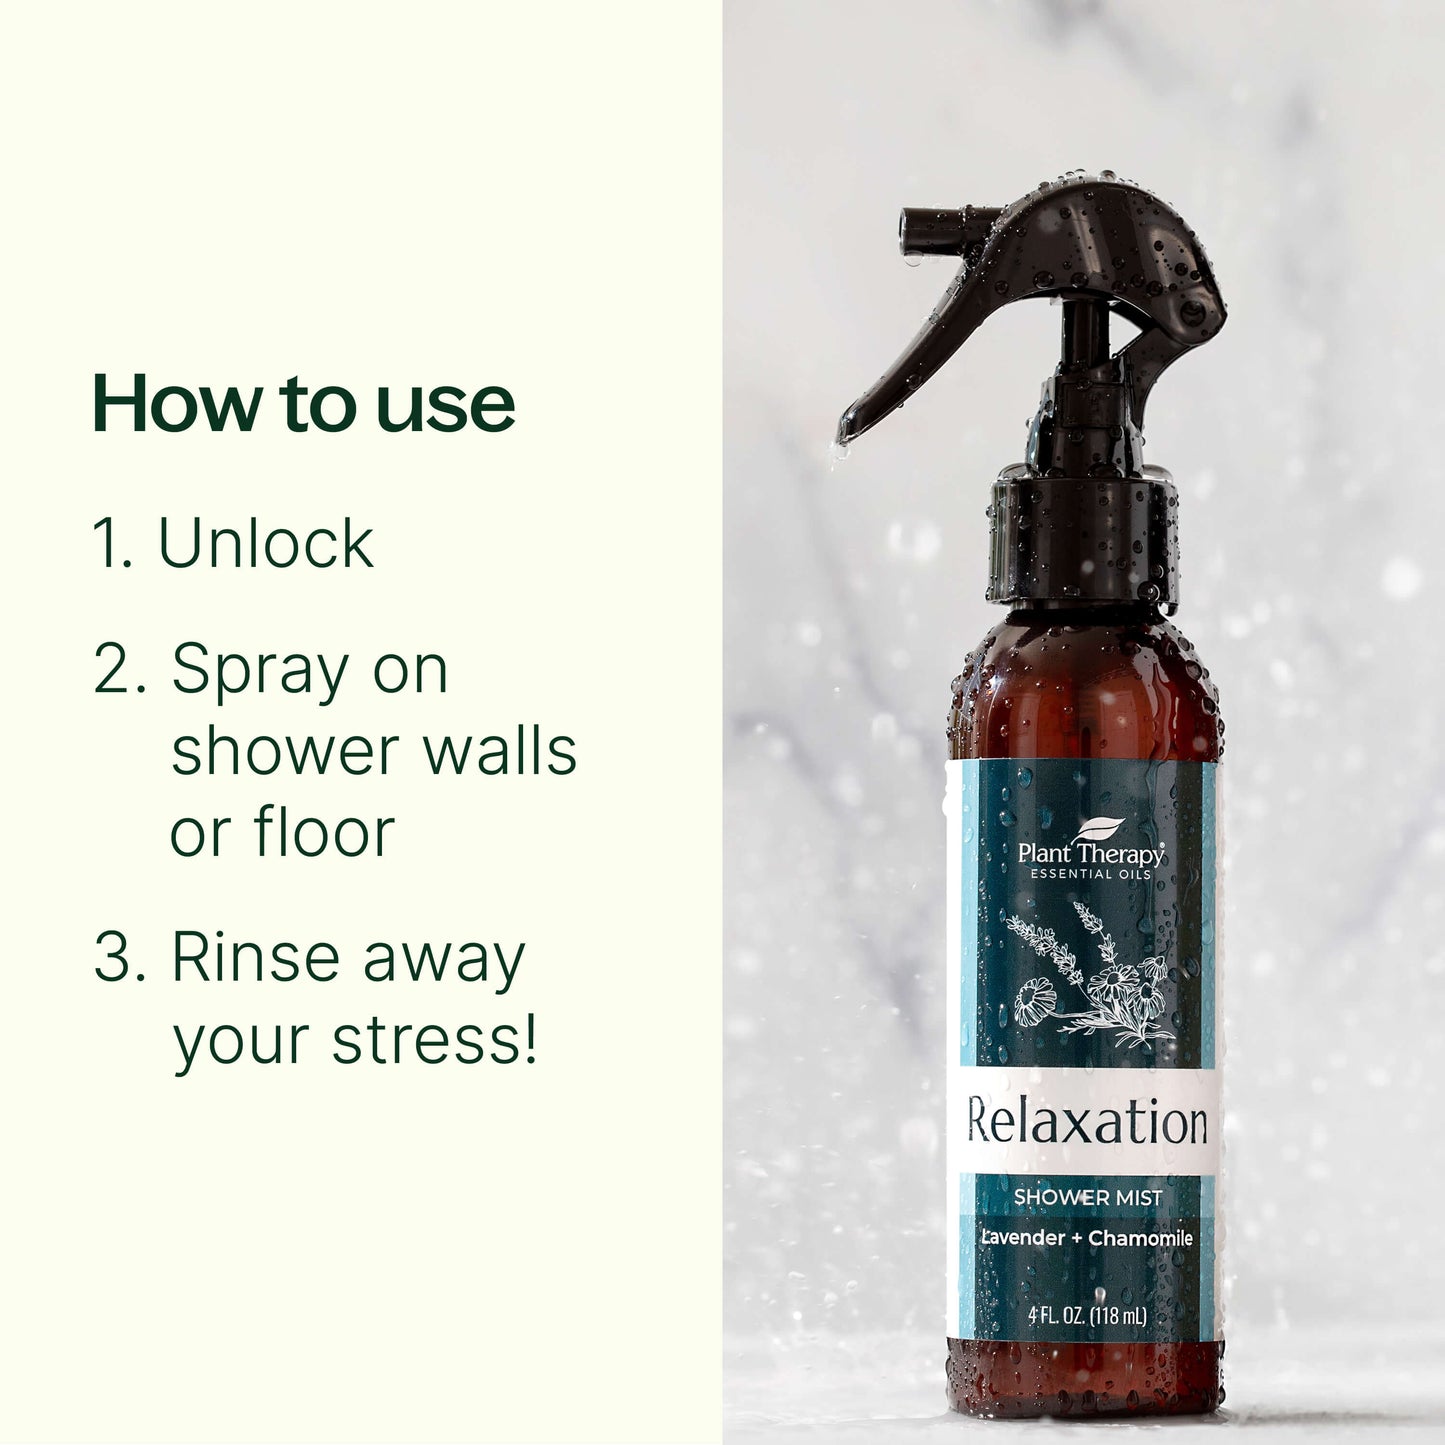 how to use Relaxation Shower Mist